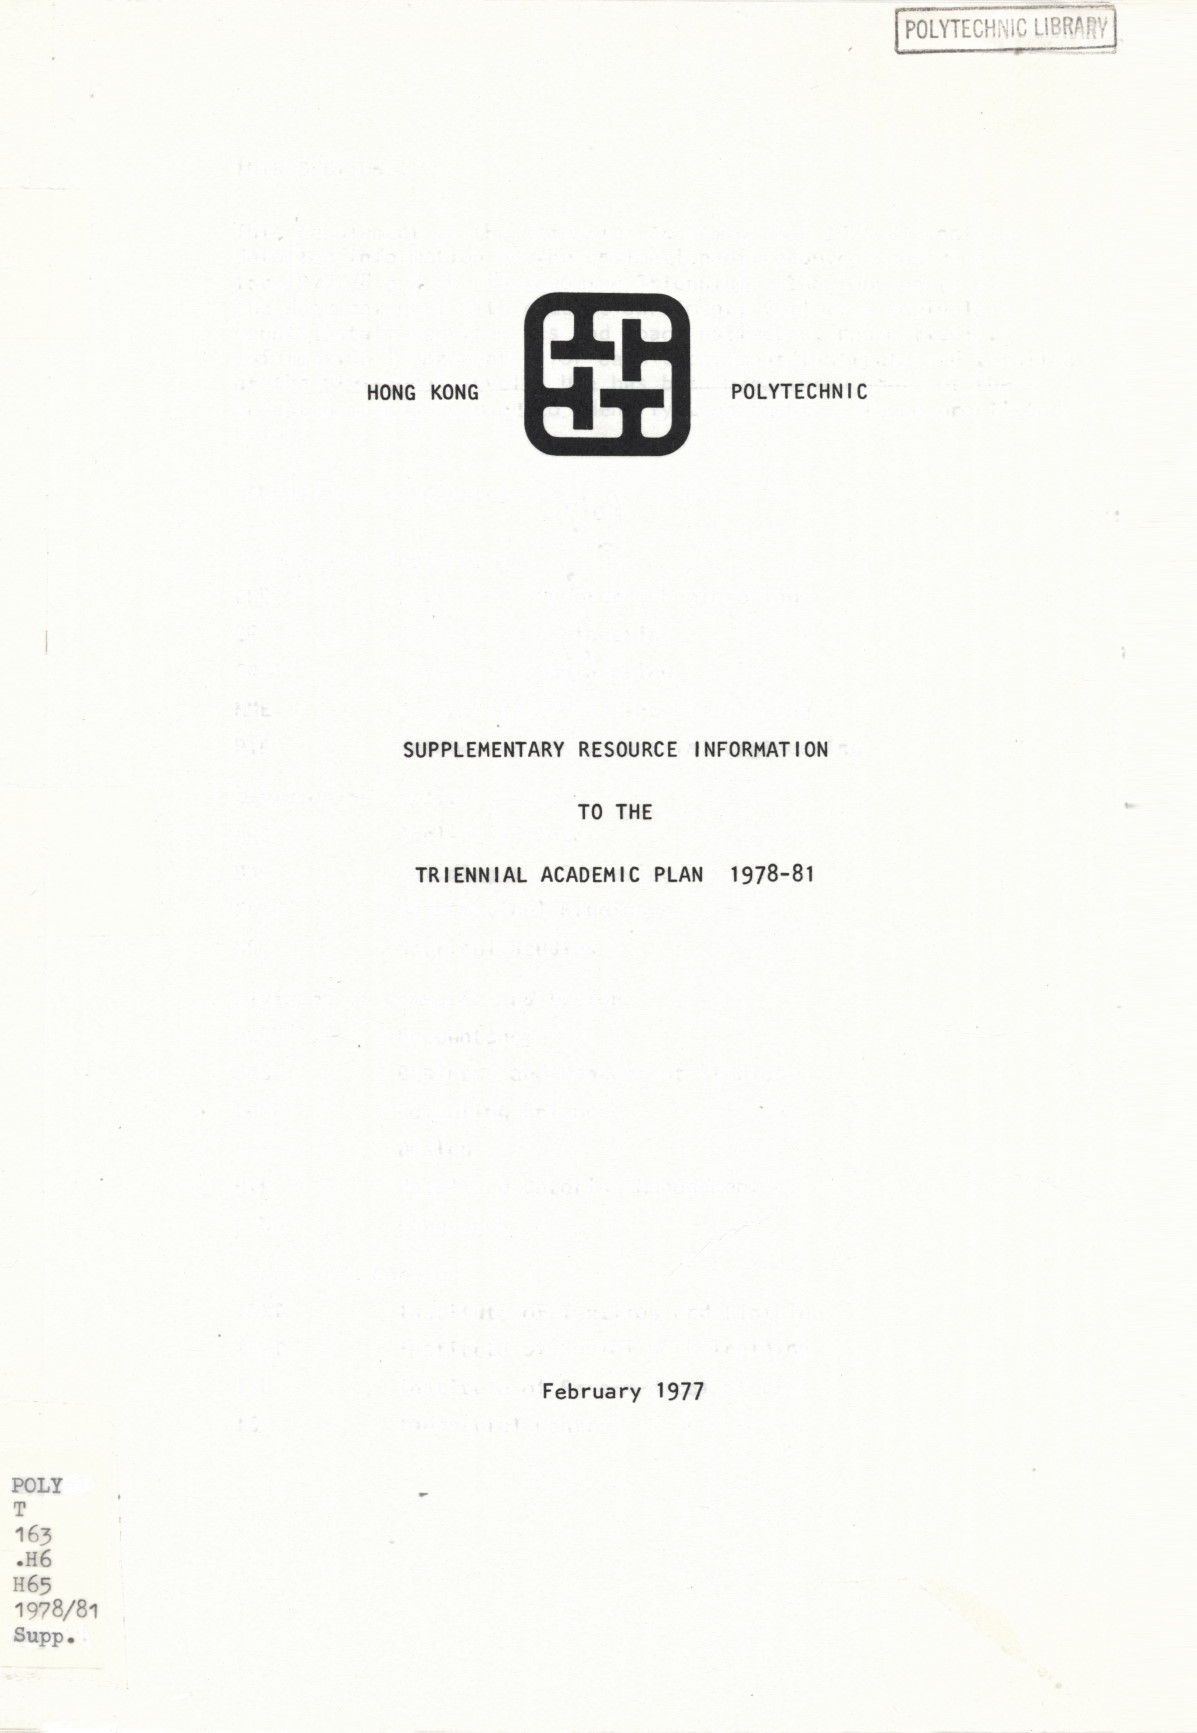 Supplementary resource information to the Triennial Academic plan 1978-81